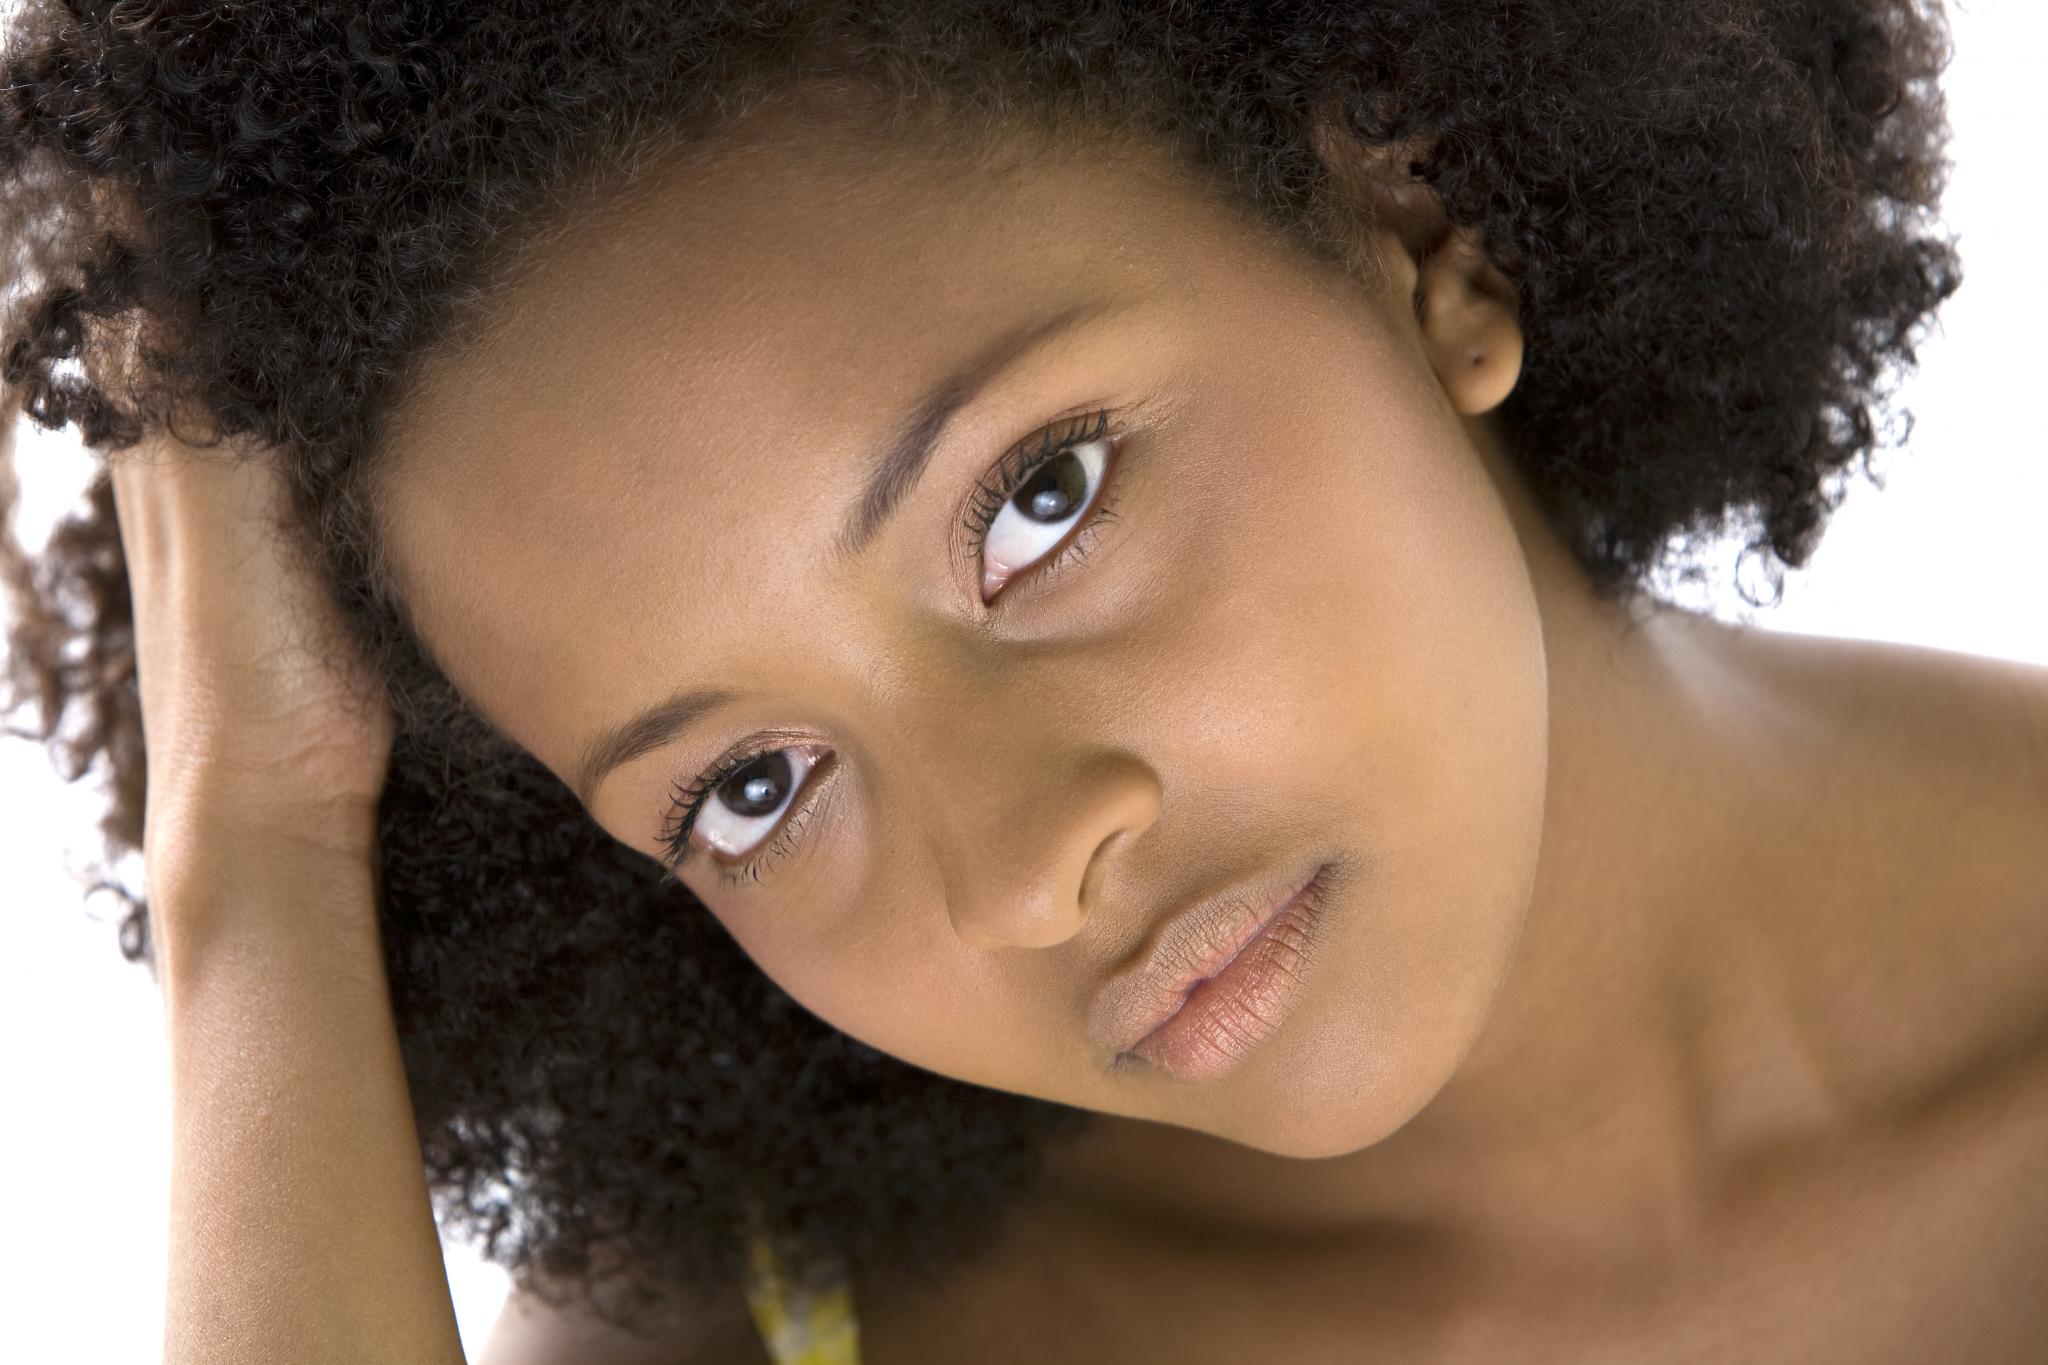 Ask the Experts: Will My Edges Grow Back?
